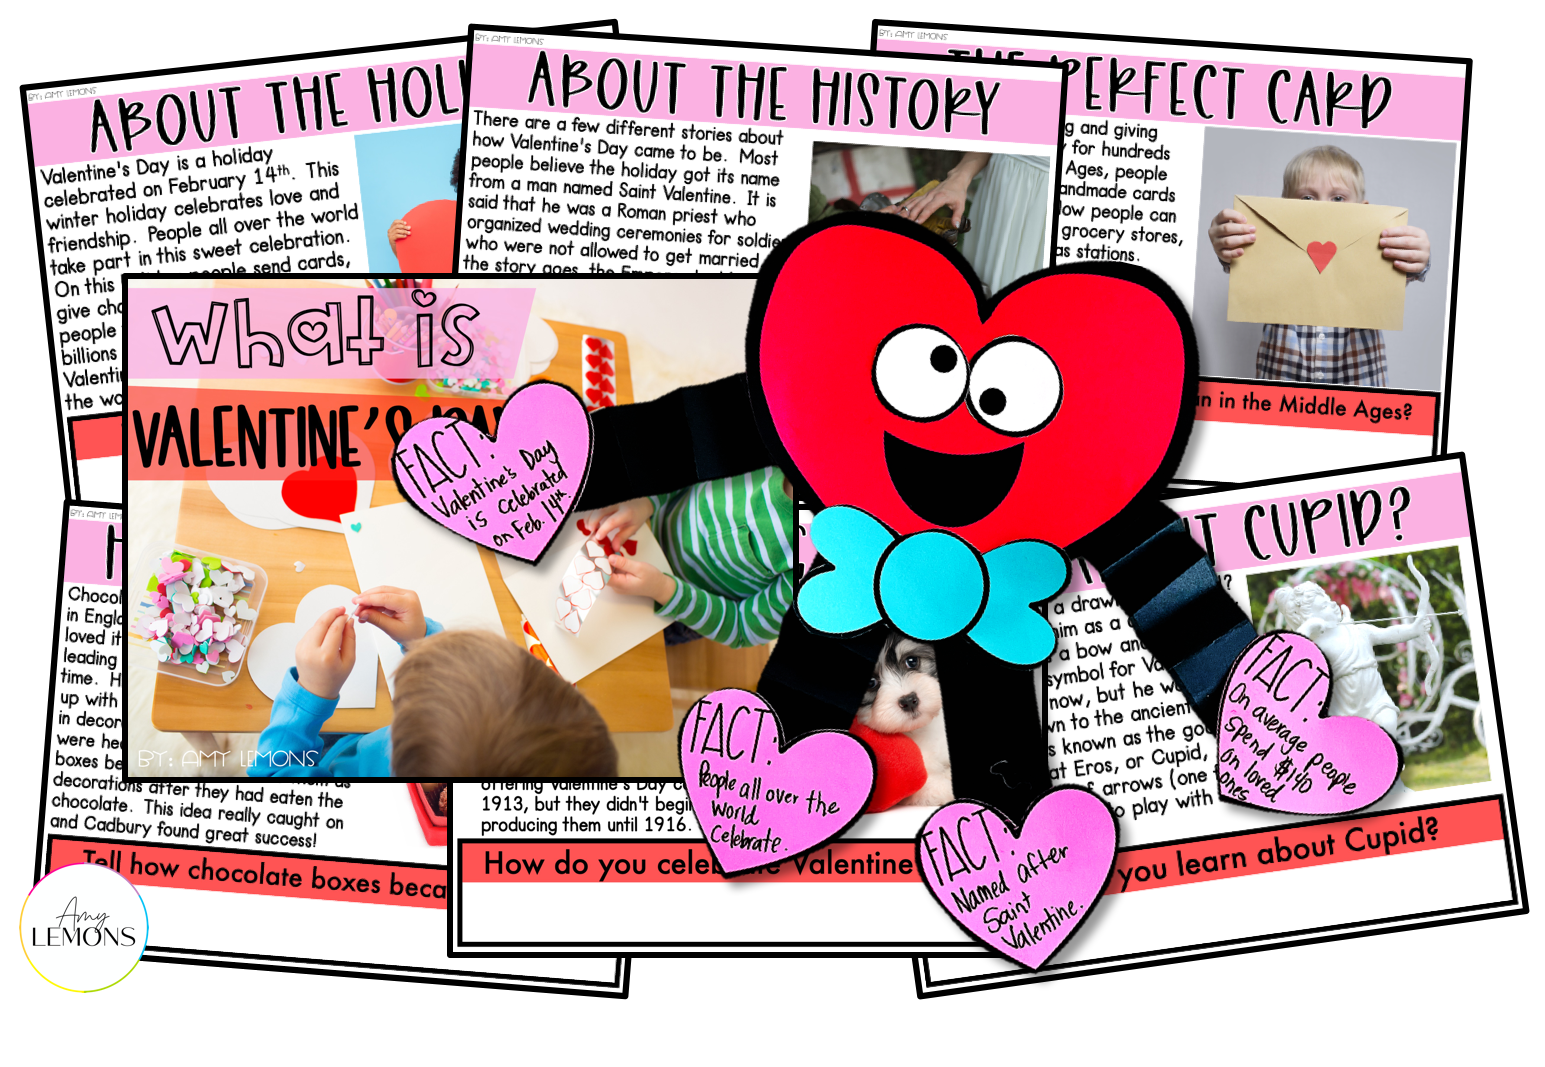 Valentine's Day reading activities to learn the history of Valentine's day with a heart craft for showing 4 facts learned.